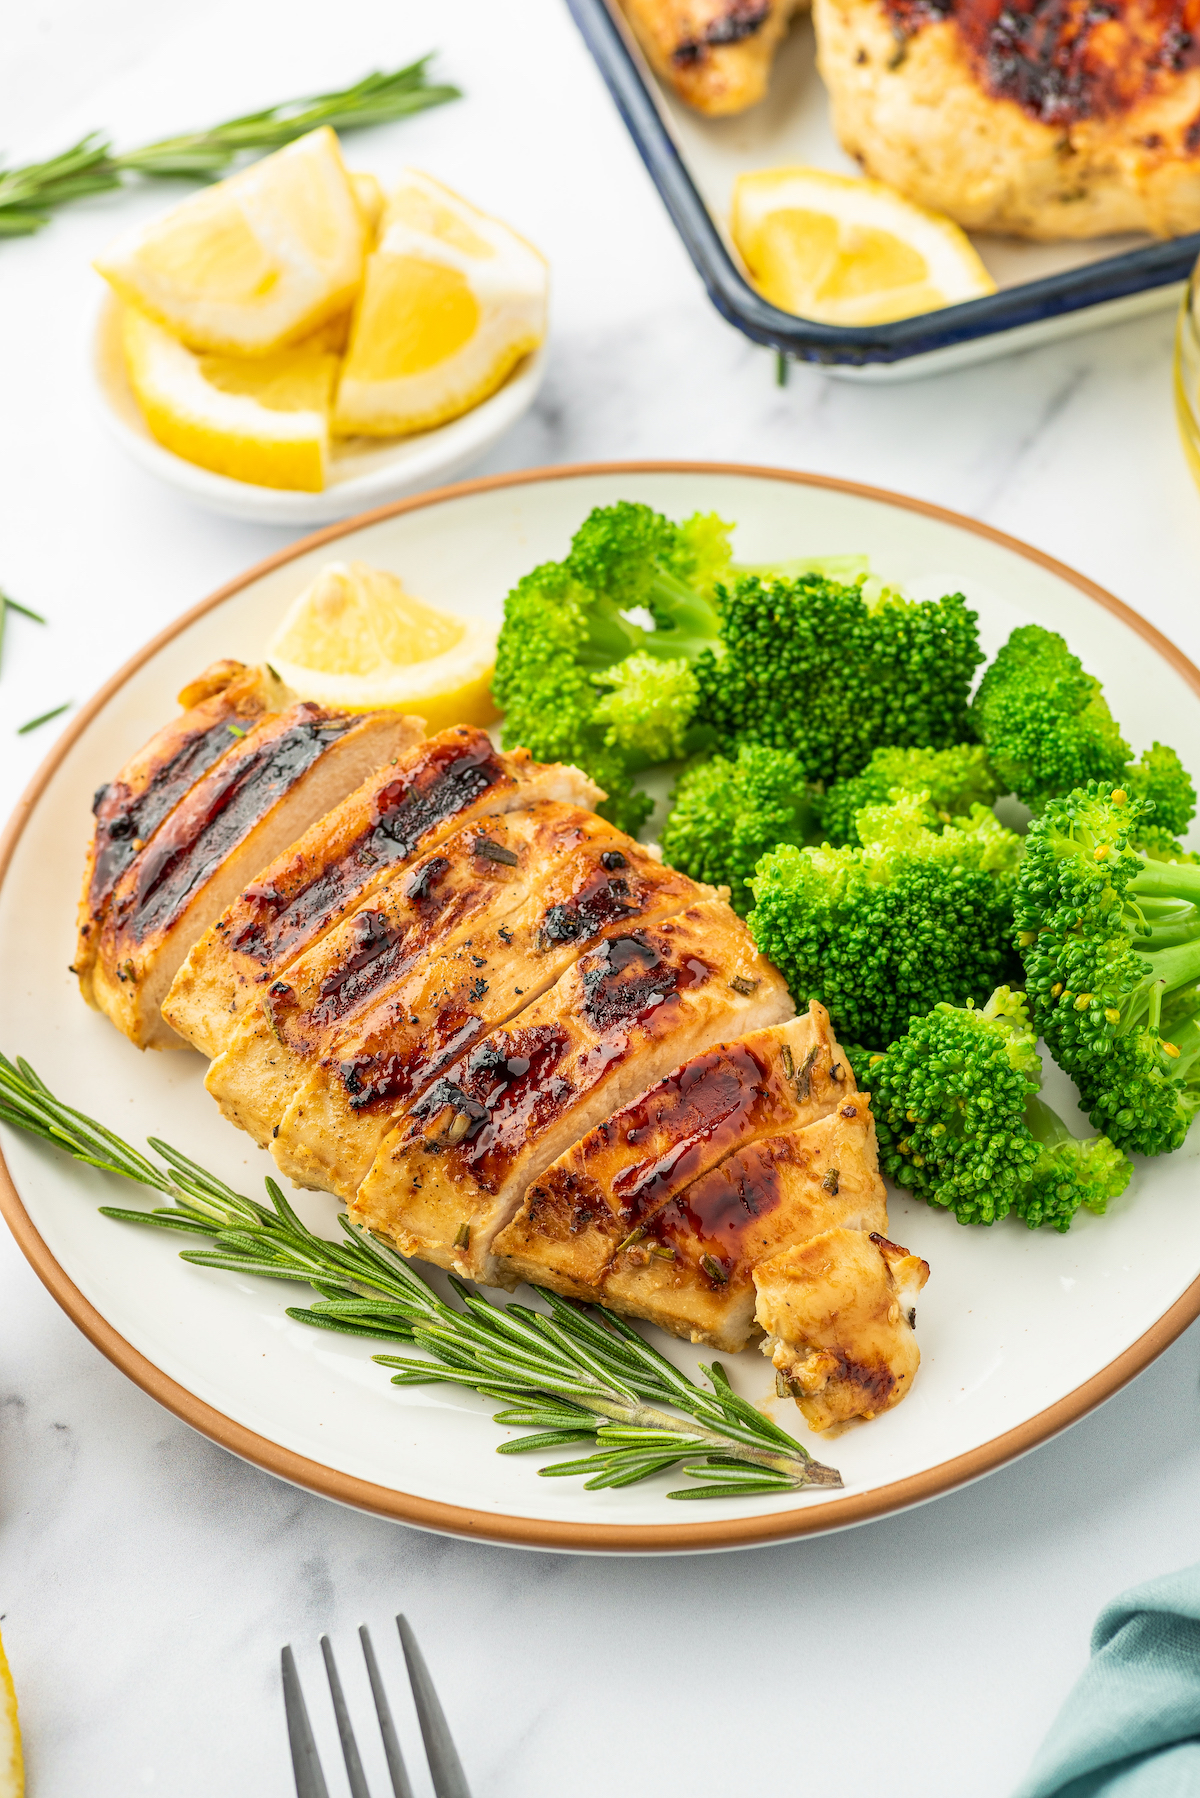 Sliced grilled rosemary honey mustard chicken on a plate, with a side of steamed broccoli and a rosemary garnish.